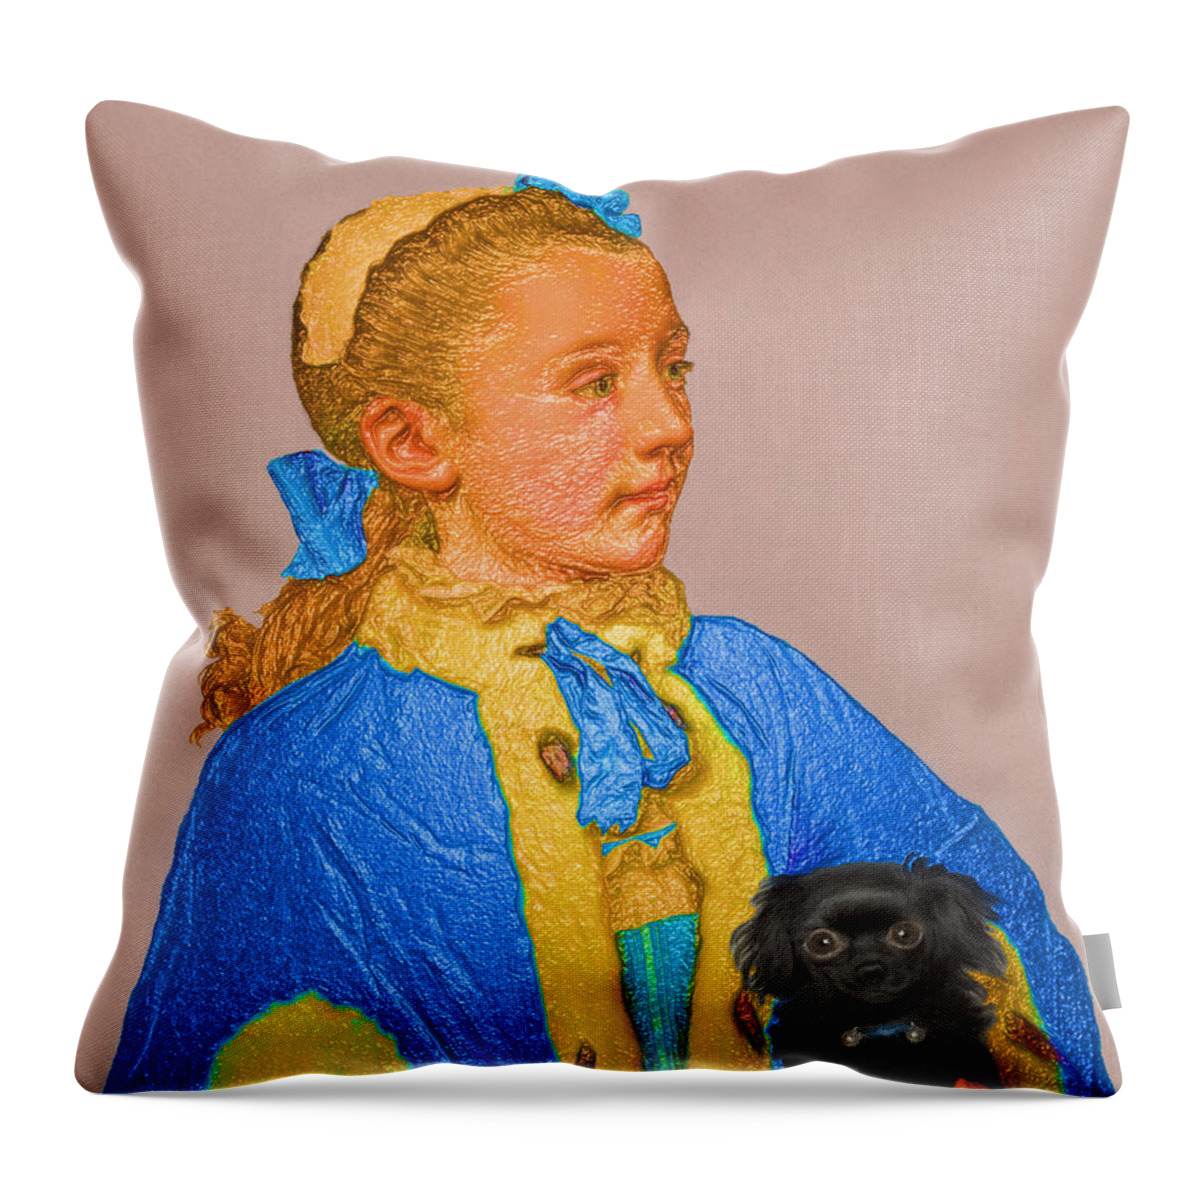 Abstract In The Living Room Throw Pillow featuring the digital art Contemporary 4 Liotard by David Bridburg